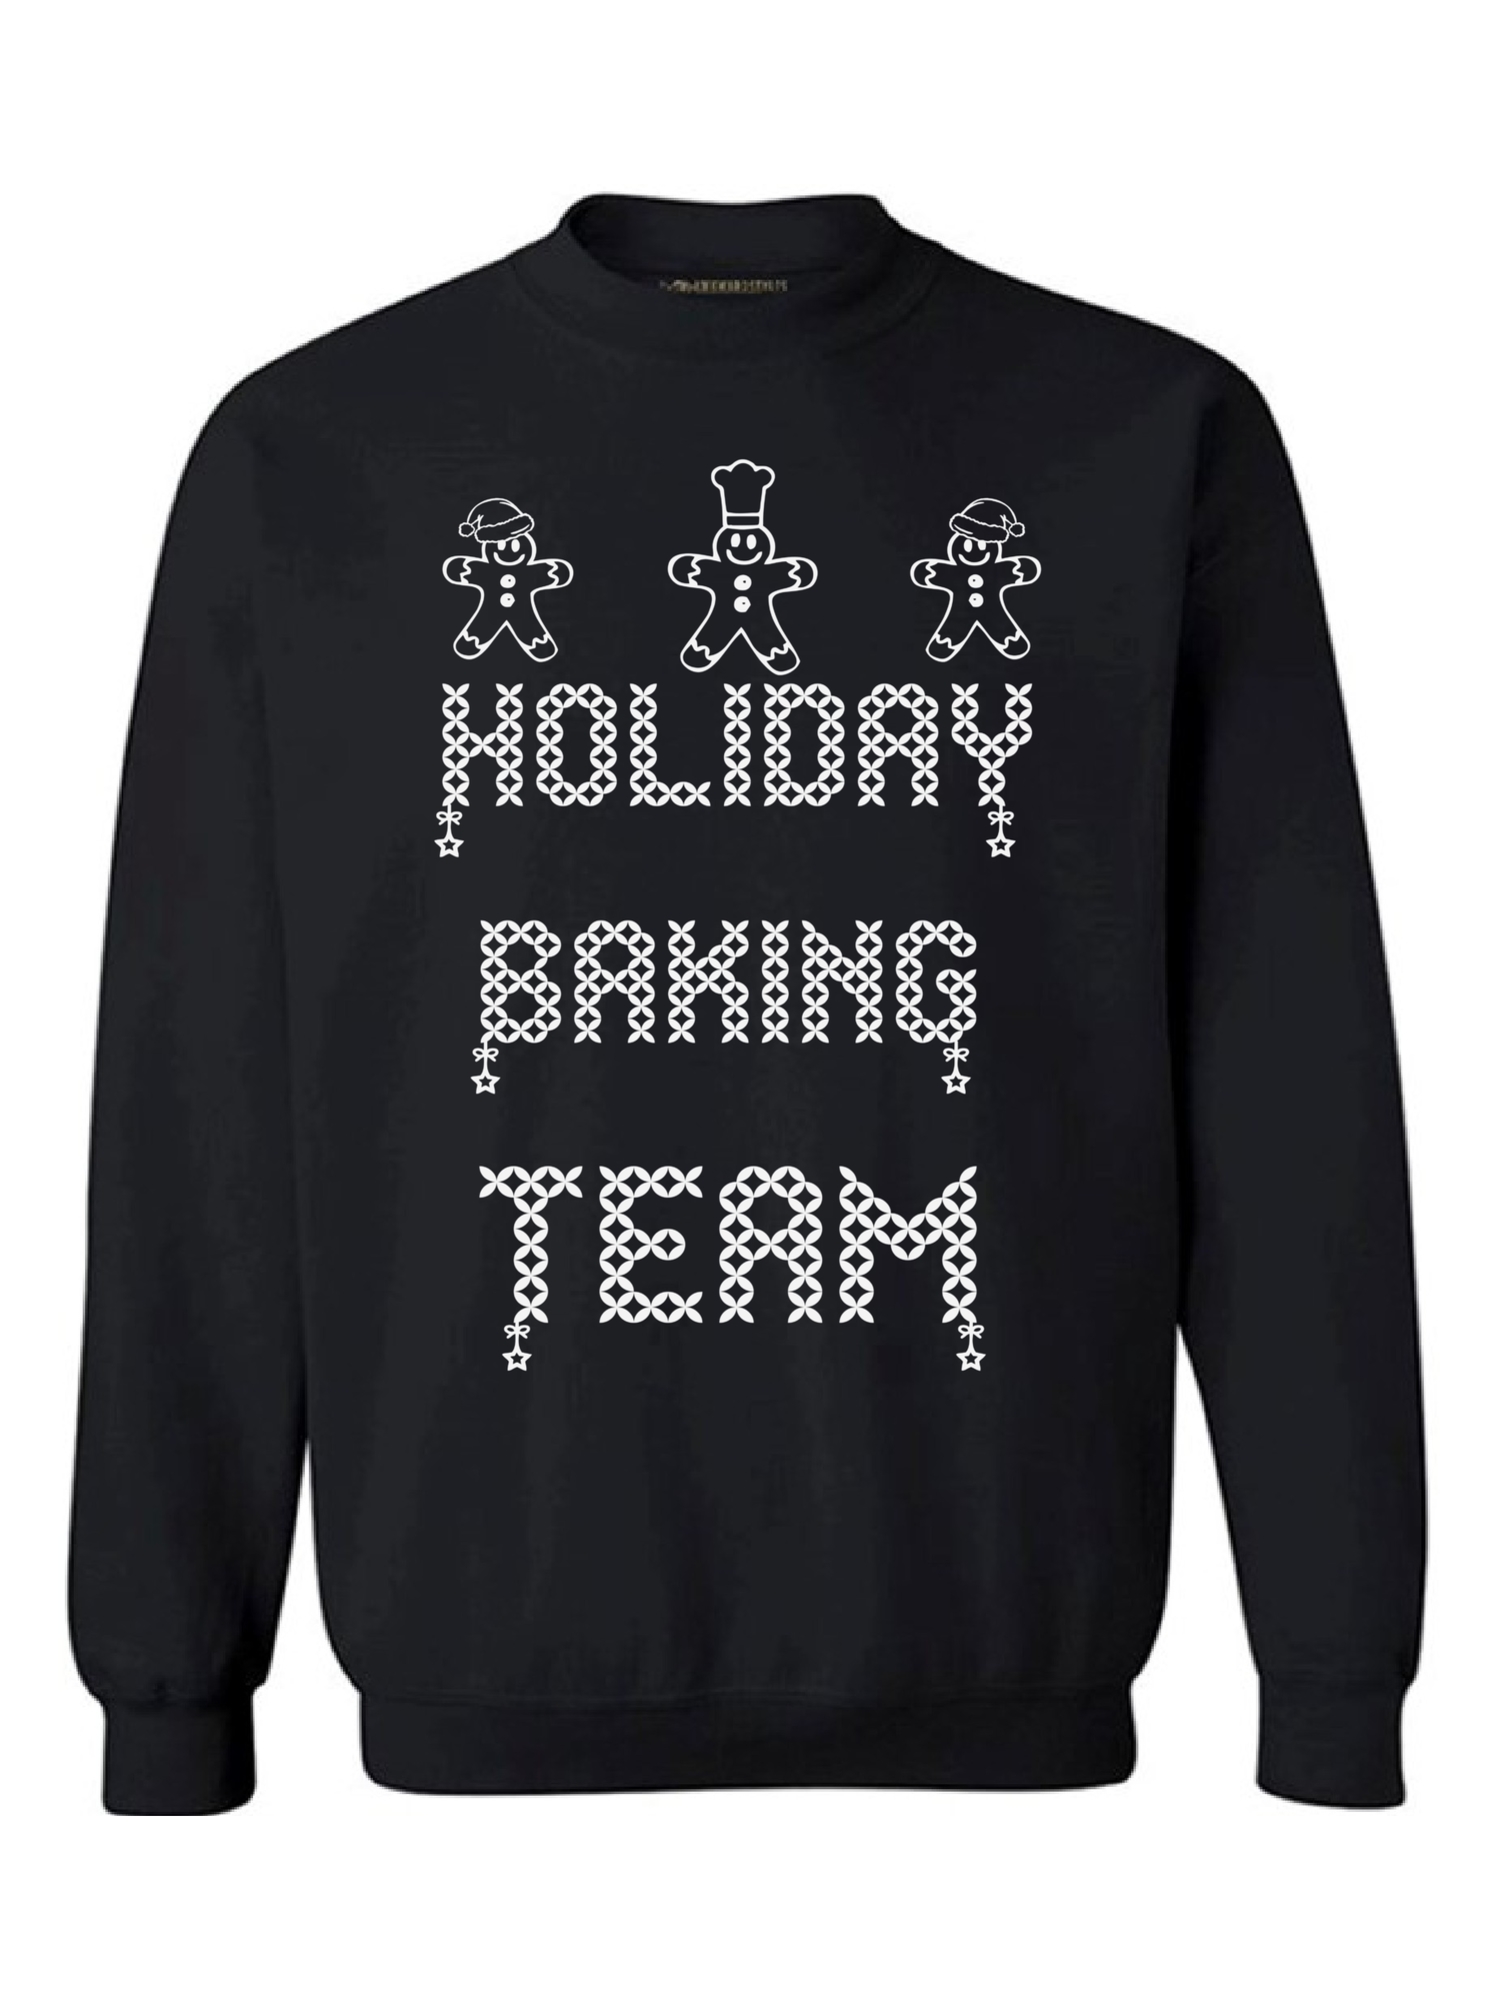 Awkward Styles Holiday Baking Team Christmas Sweatshirt Christmas Gingerbread Holiday Sweatshirt Christmas Cookies Thanksgiving Sweater Family Holiday Xmas Sweater Thanksgiving Sweatshirt Men & Women - image 1 of 5